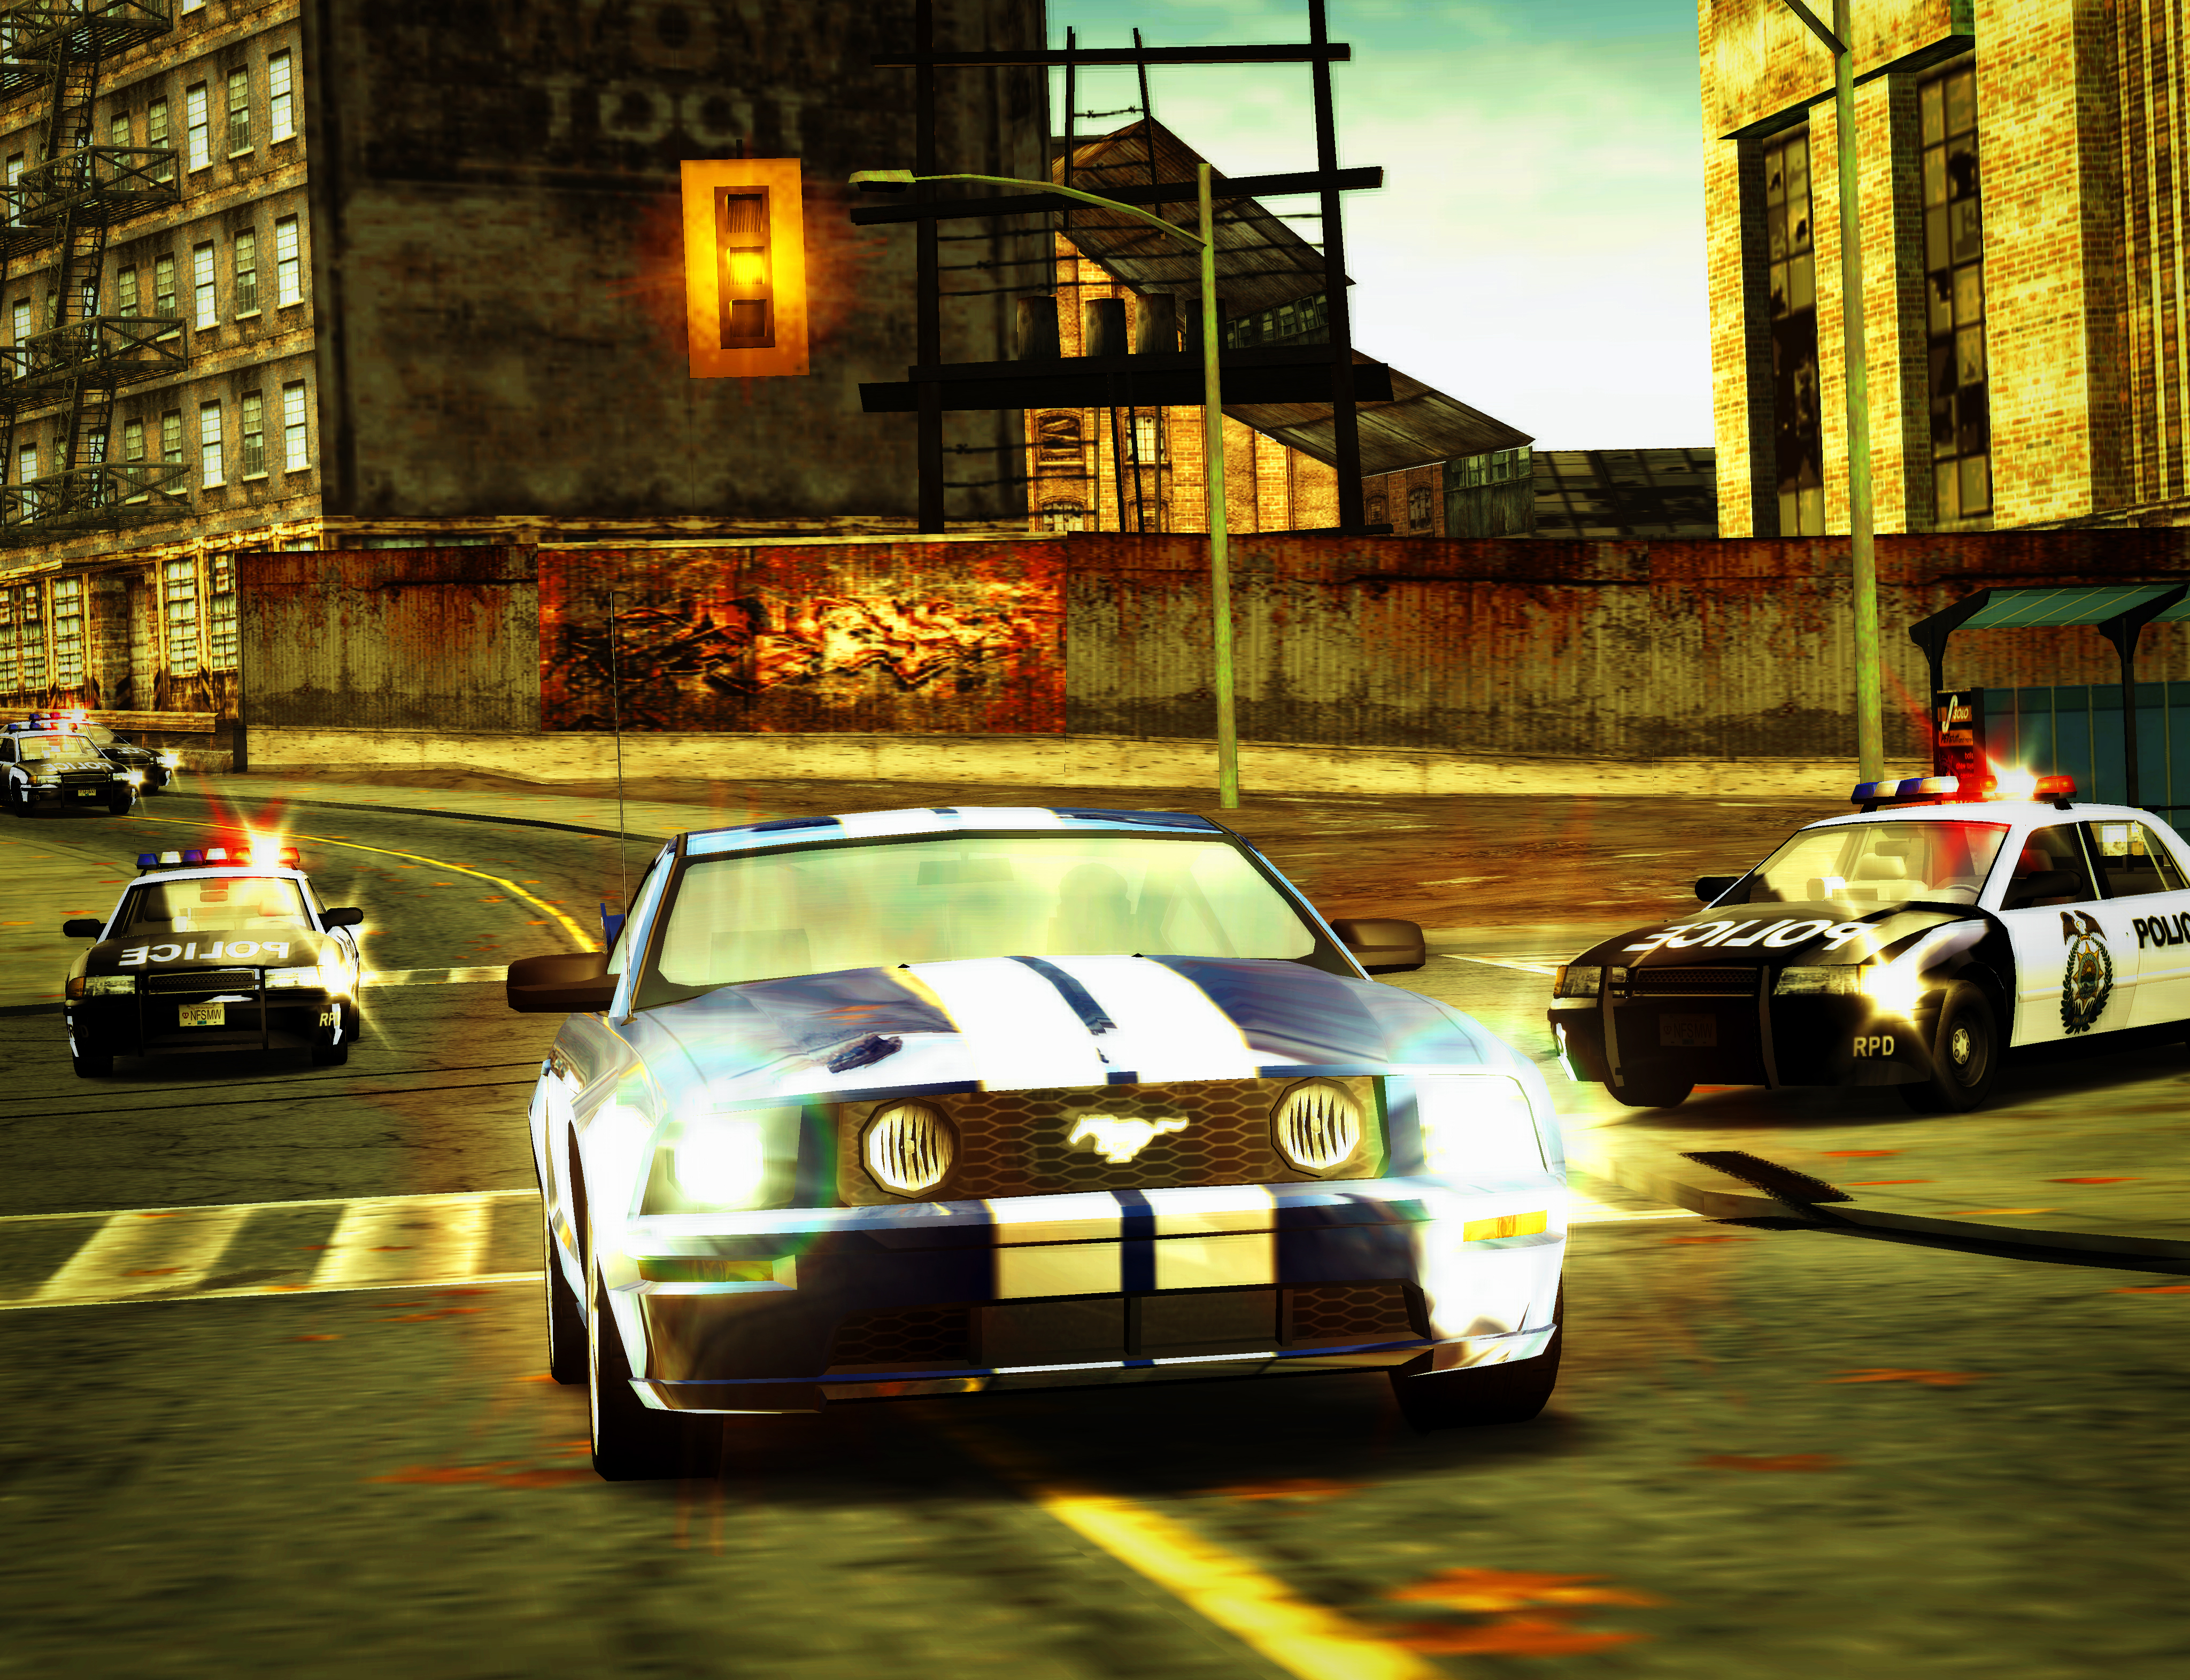 Игры машины нфс. Need for Speed most wanted 2005. Нфс МВ 2005. Гонки NFS most wanted. Гонки NFS most wanted 2005.